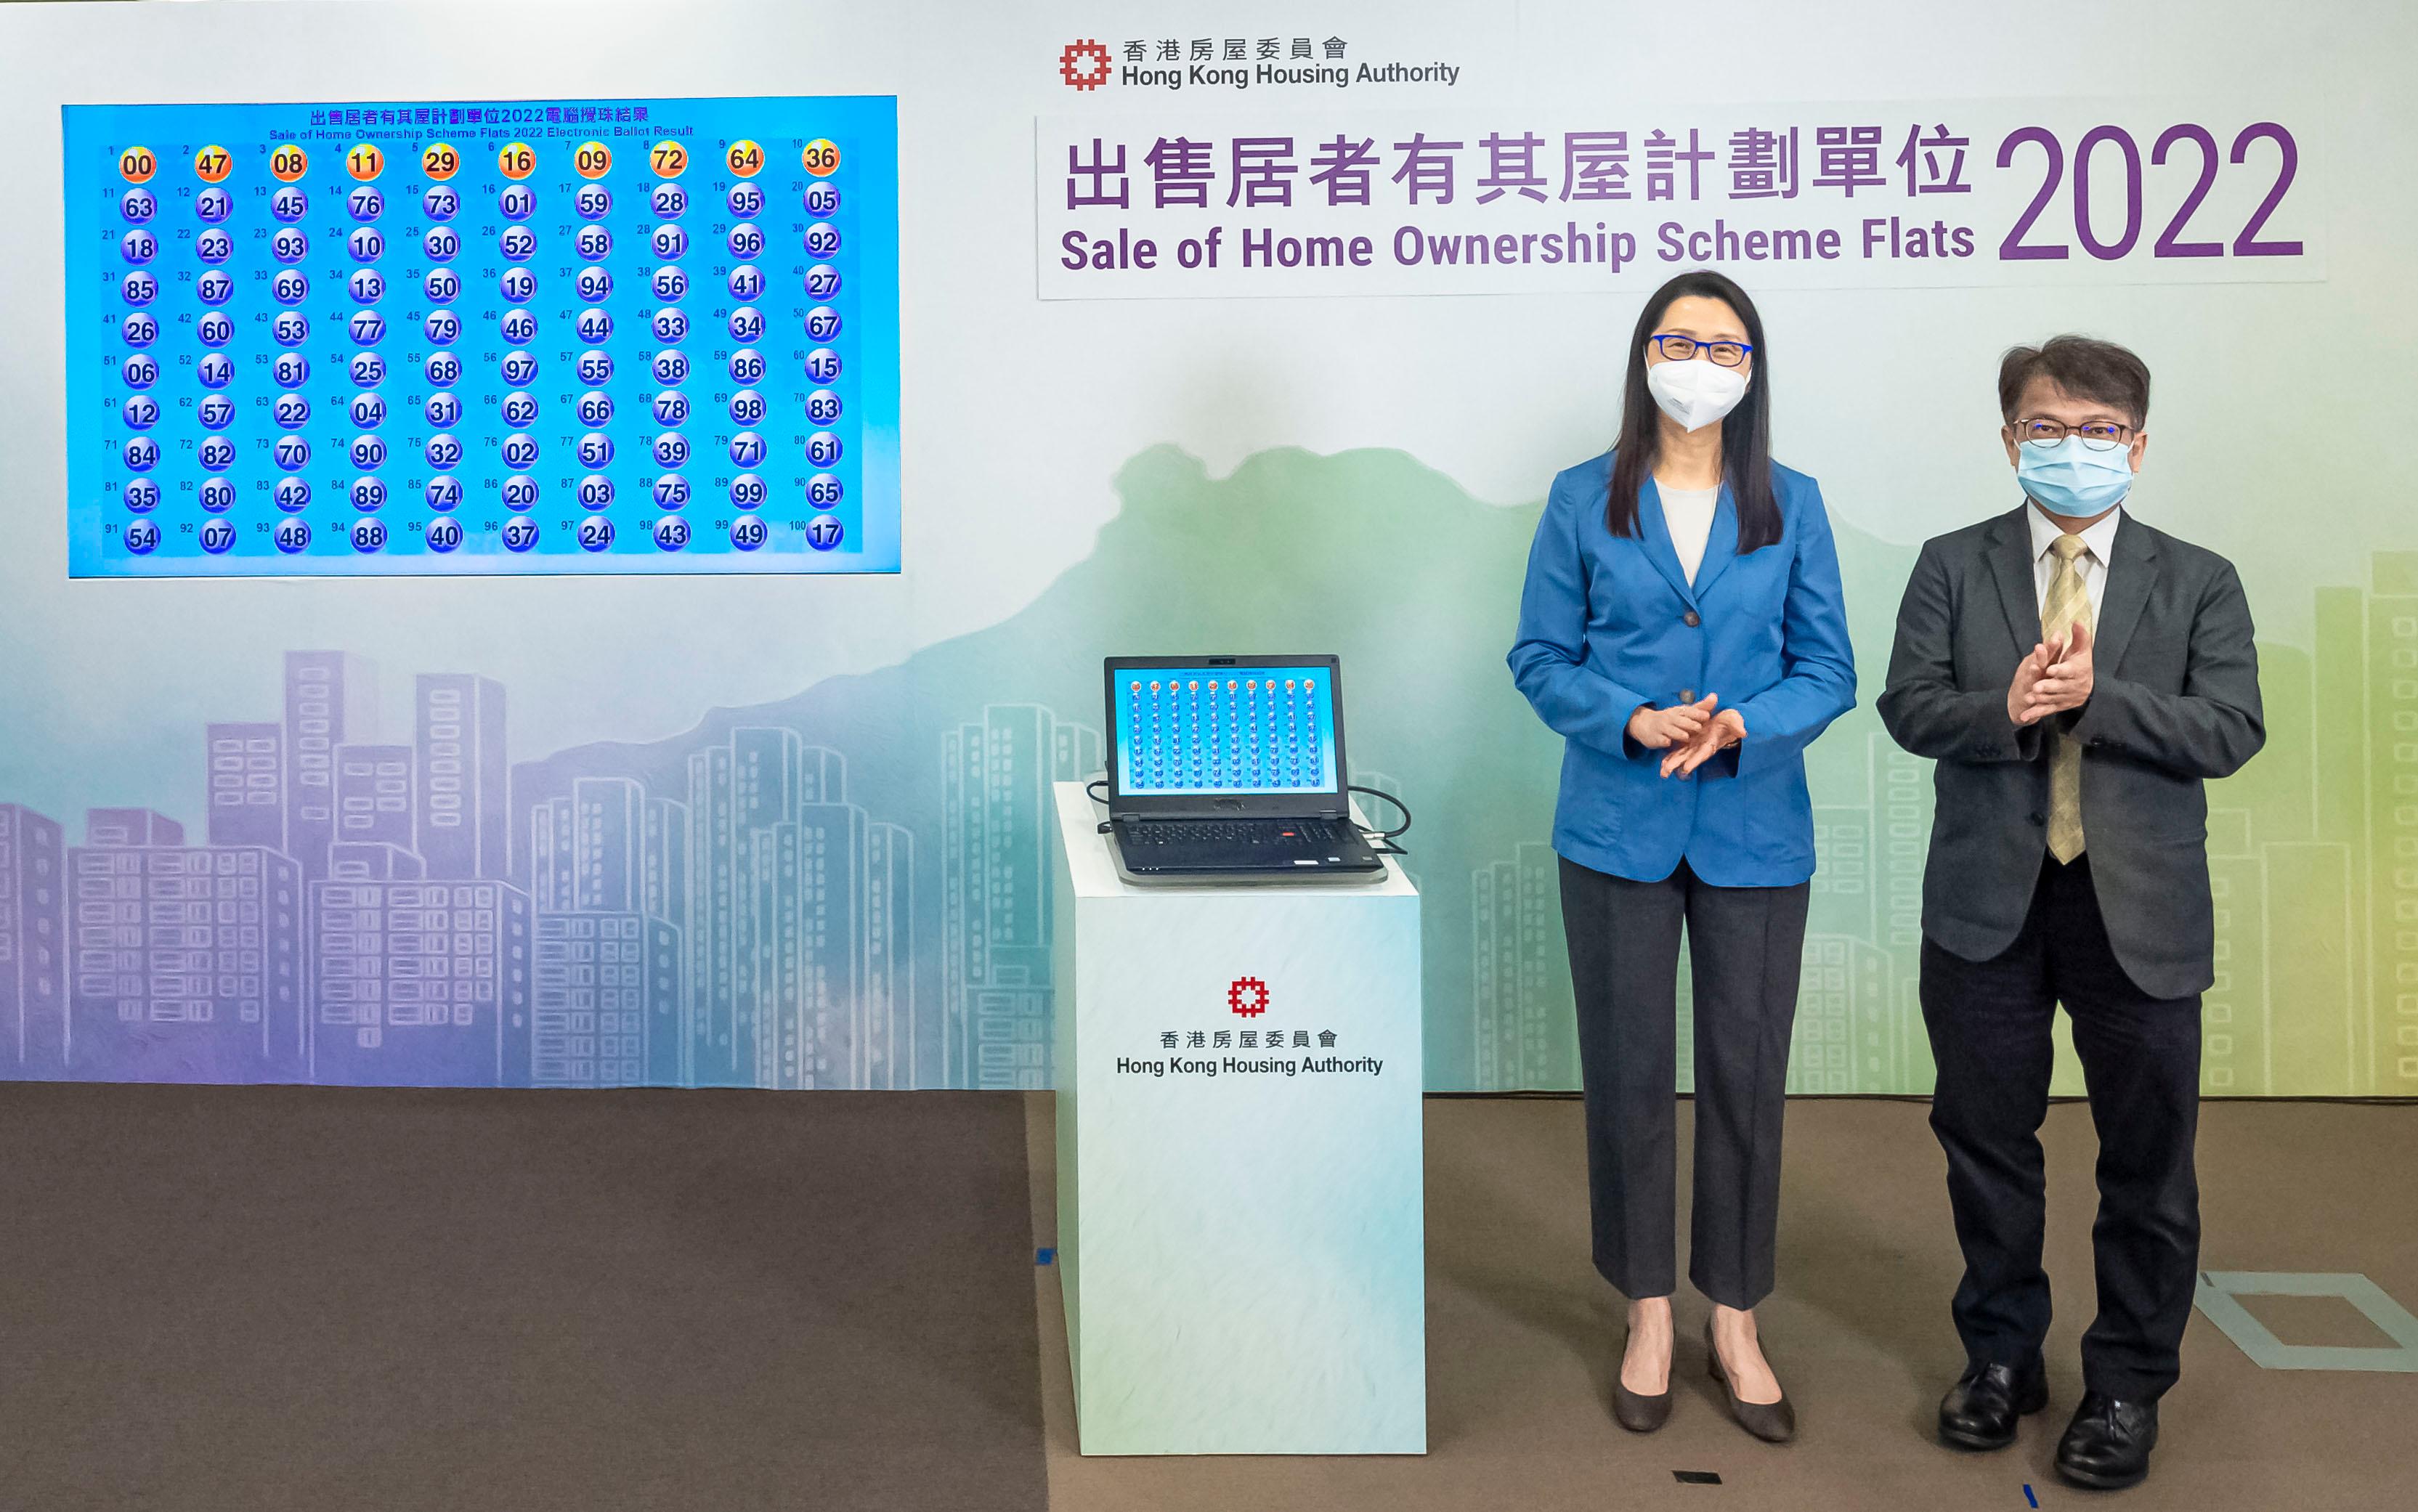 The Chairman of the Subsidised Housing Committee of the Hong Kong Housing Authority, Ms Cleresa Wong (left), accompanied by the Assistant Director of Housing (Housing Subsidies), Mr Kenneth Leung, officiates at the electronic ballot drawing ceremony today (June 13) for the Sale of Home Ownership Scheme Flats 2022. The ballot results will determine the applicants' priority sequence based on the last two digits of their application numbers.